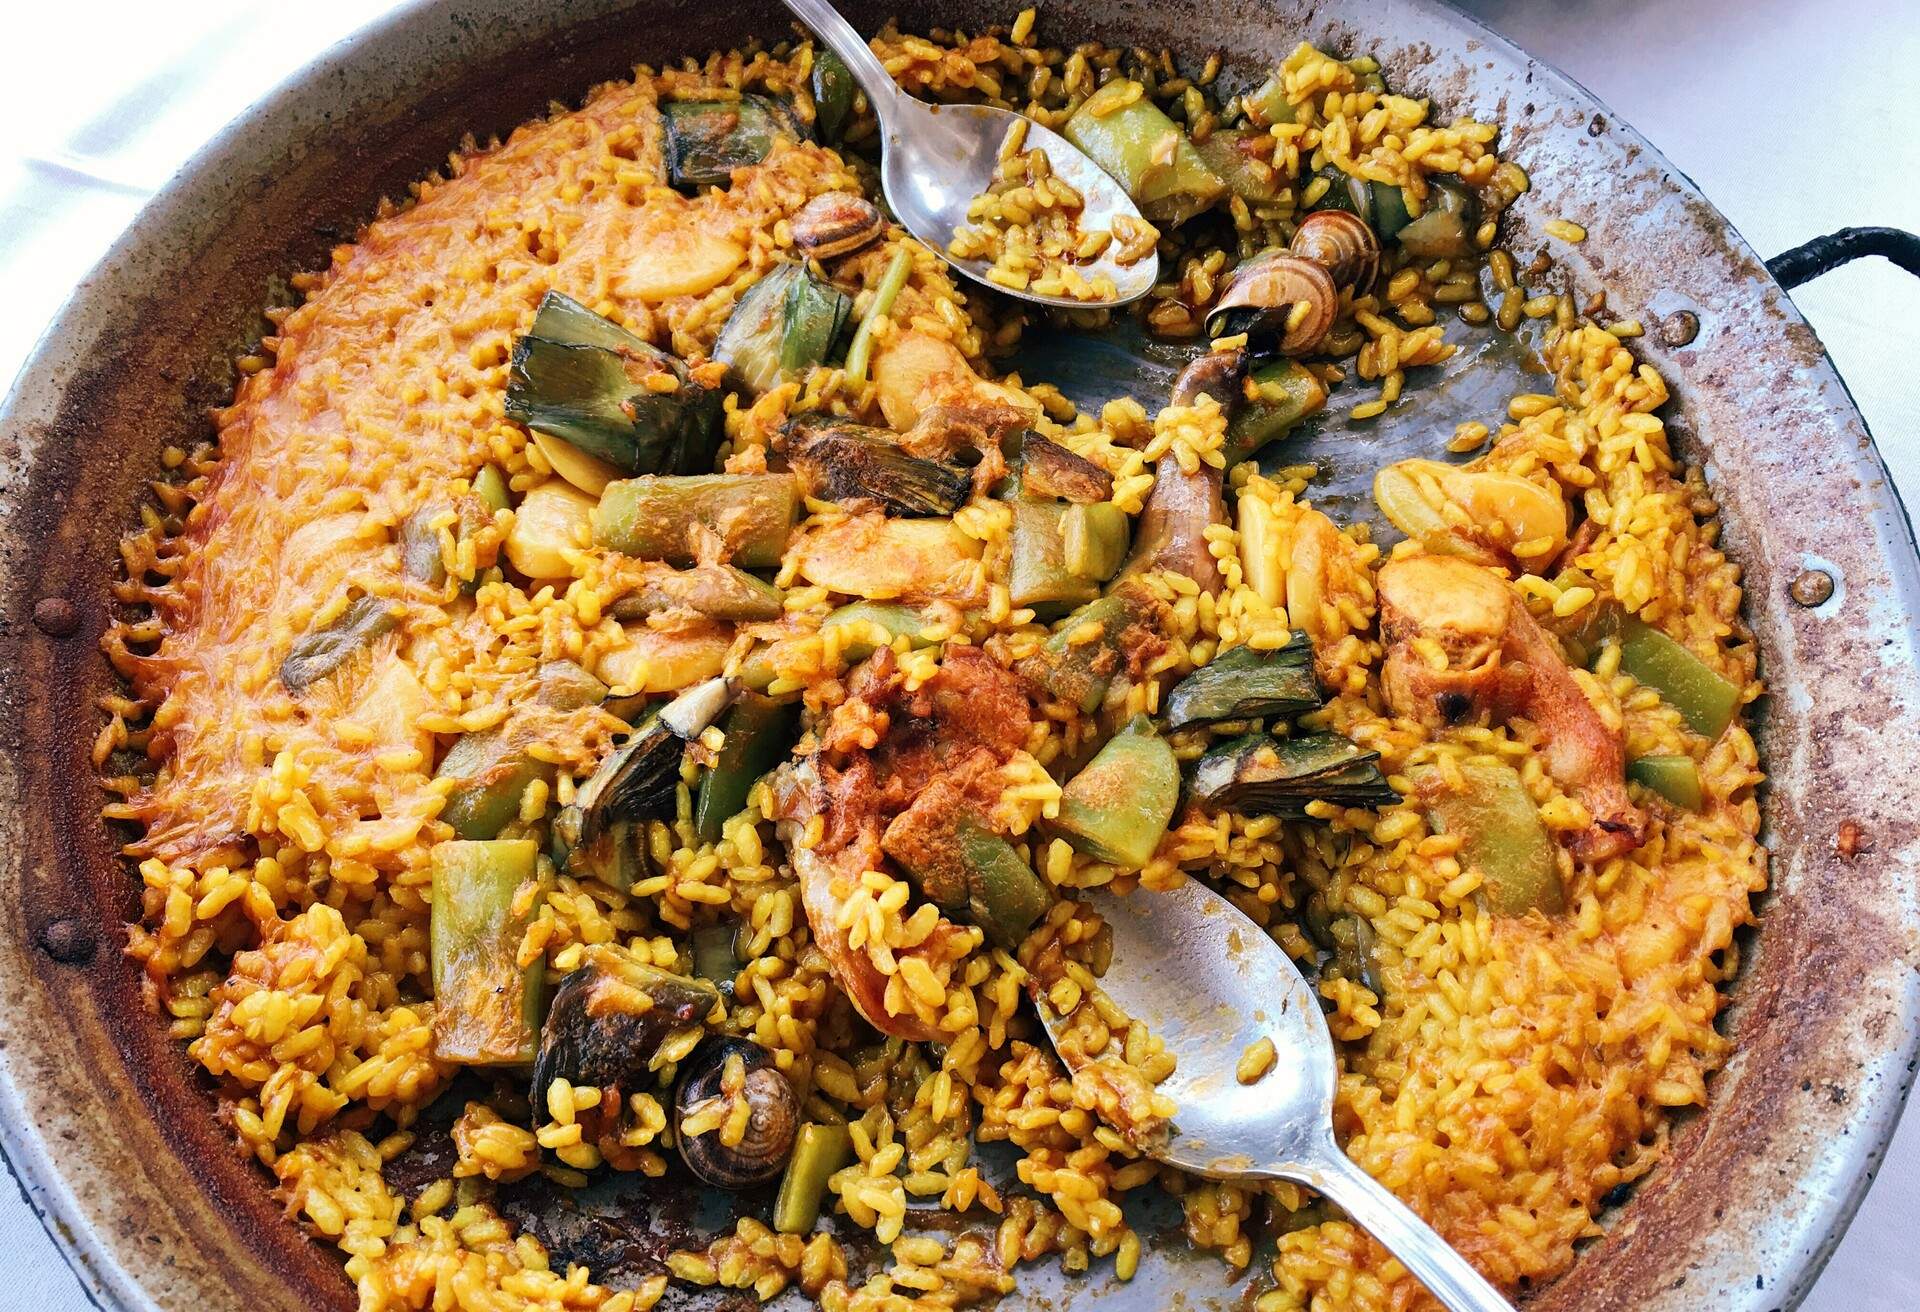 THEME_FOOD_SPANISH_TRADITIONAL_VALENCIA_PAELLA_GettyImages-901161078.jpg